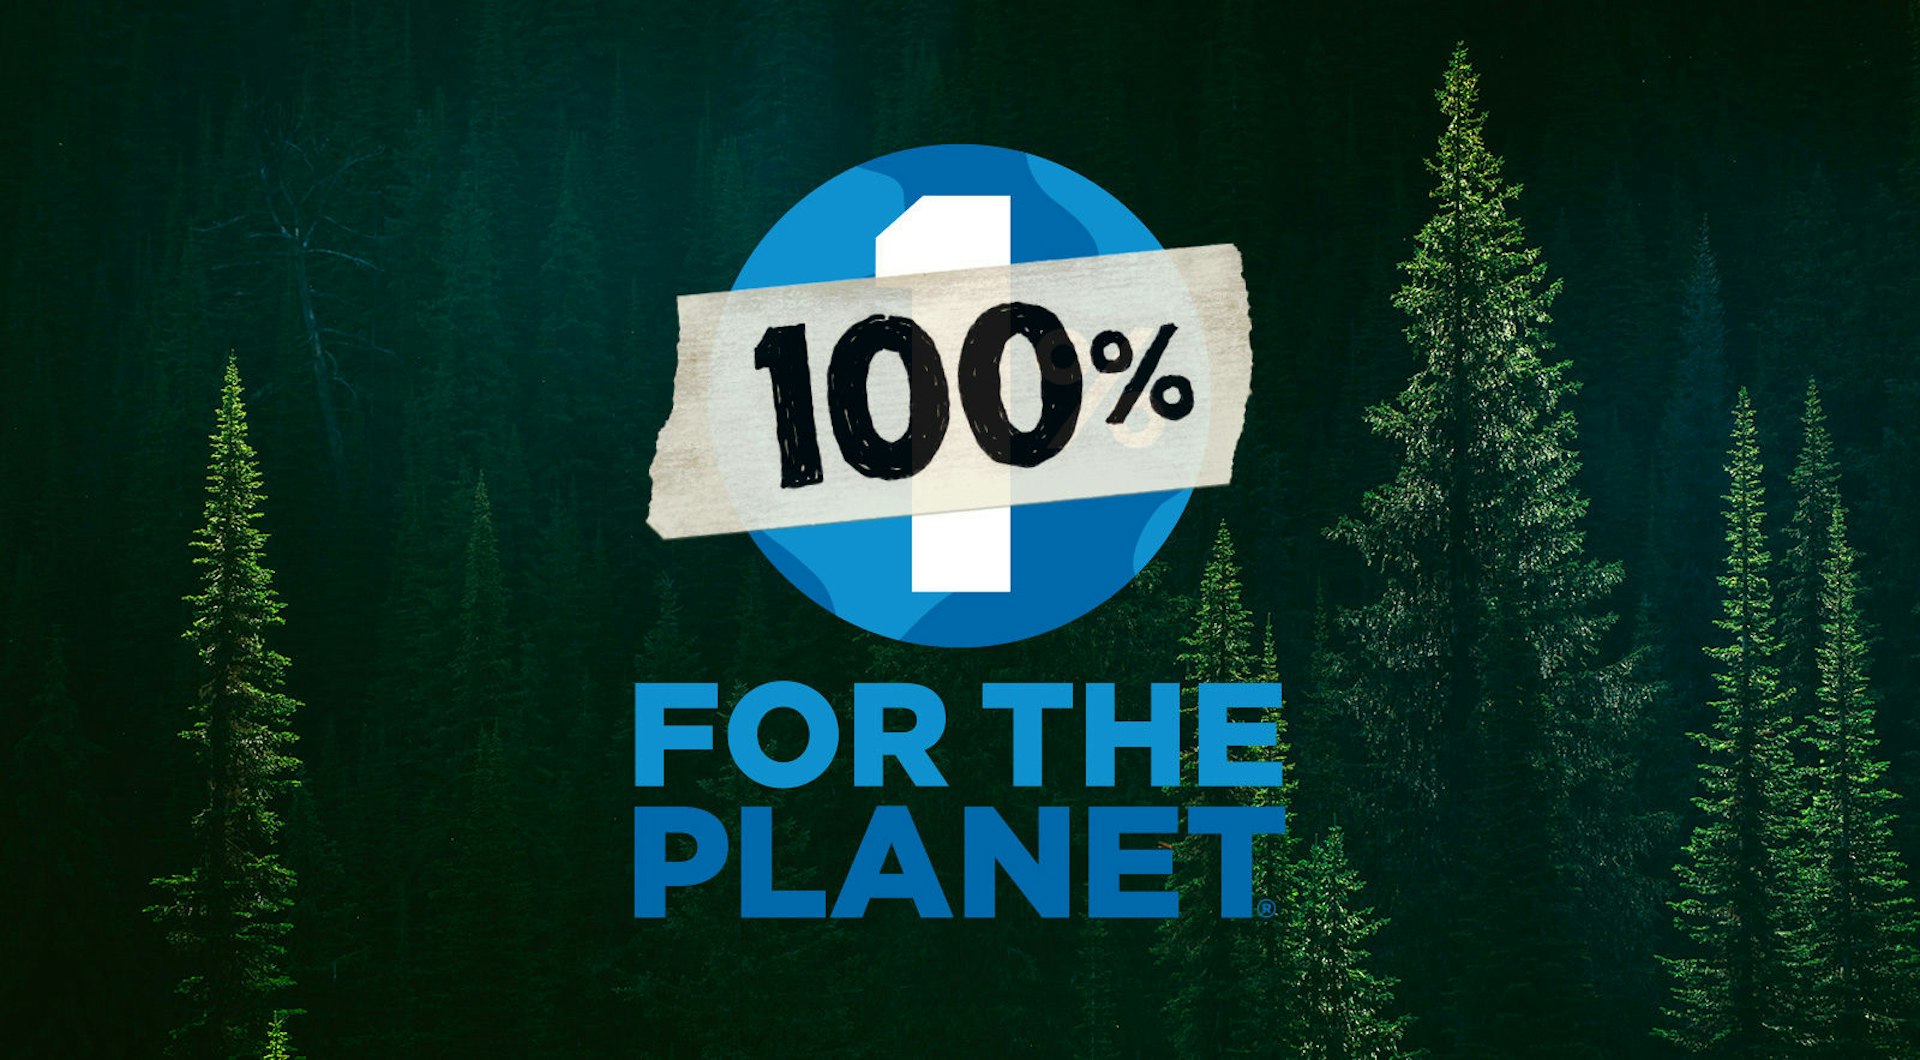 Black Friday is terrible for the planet: Patagonia challenge us to think and buy differently